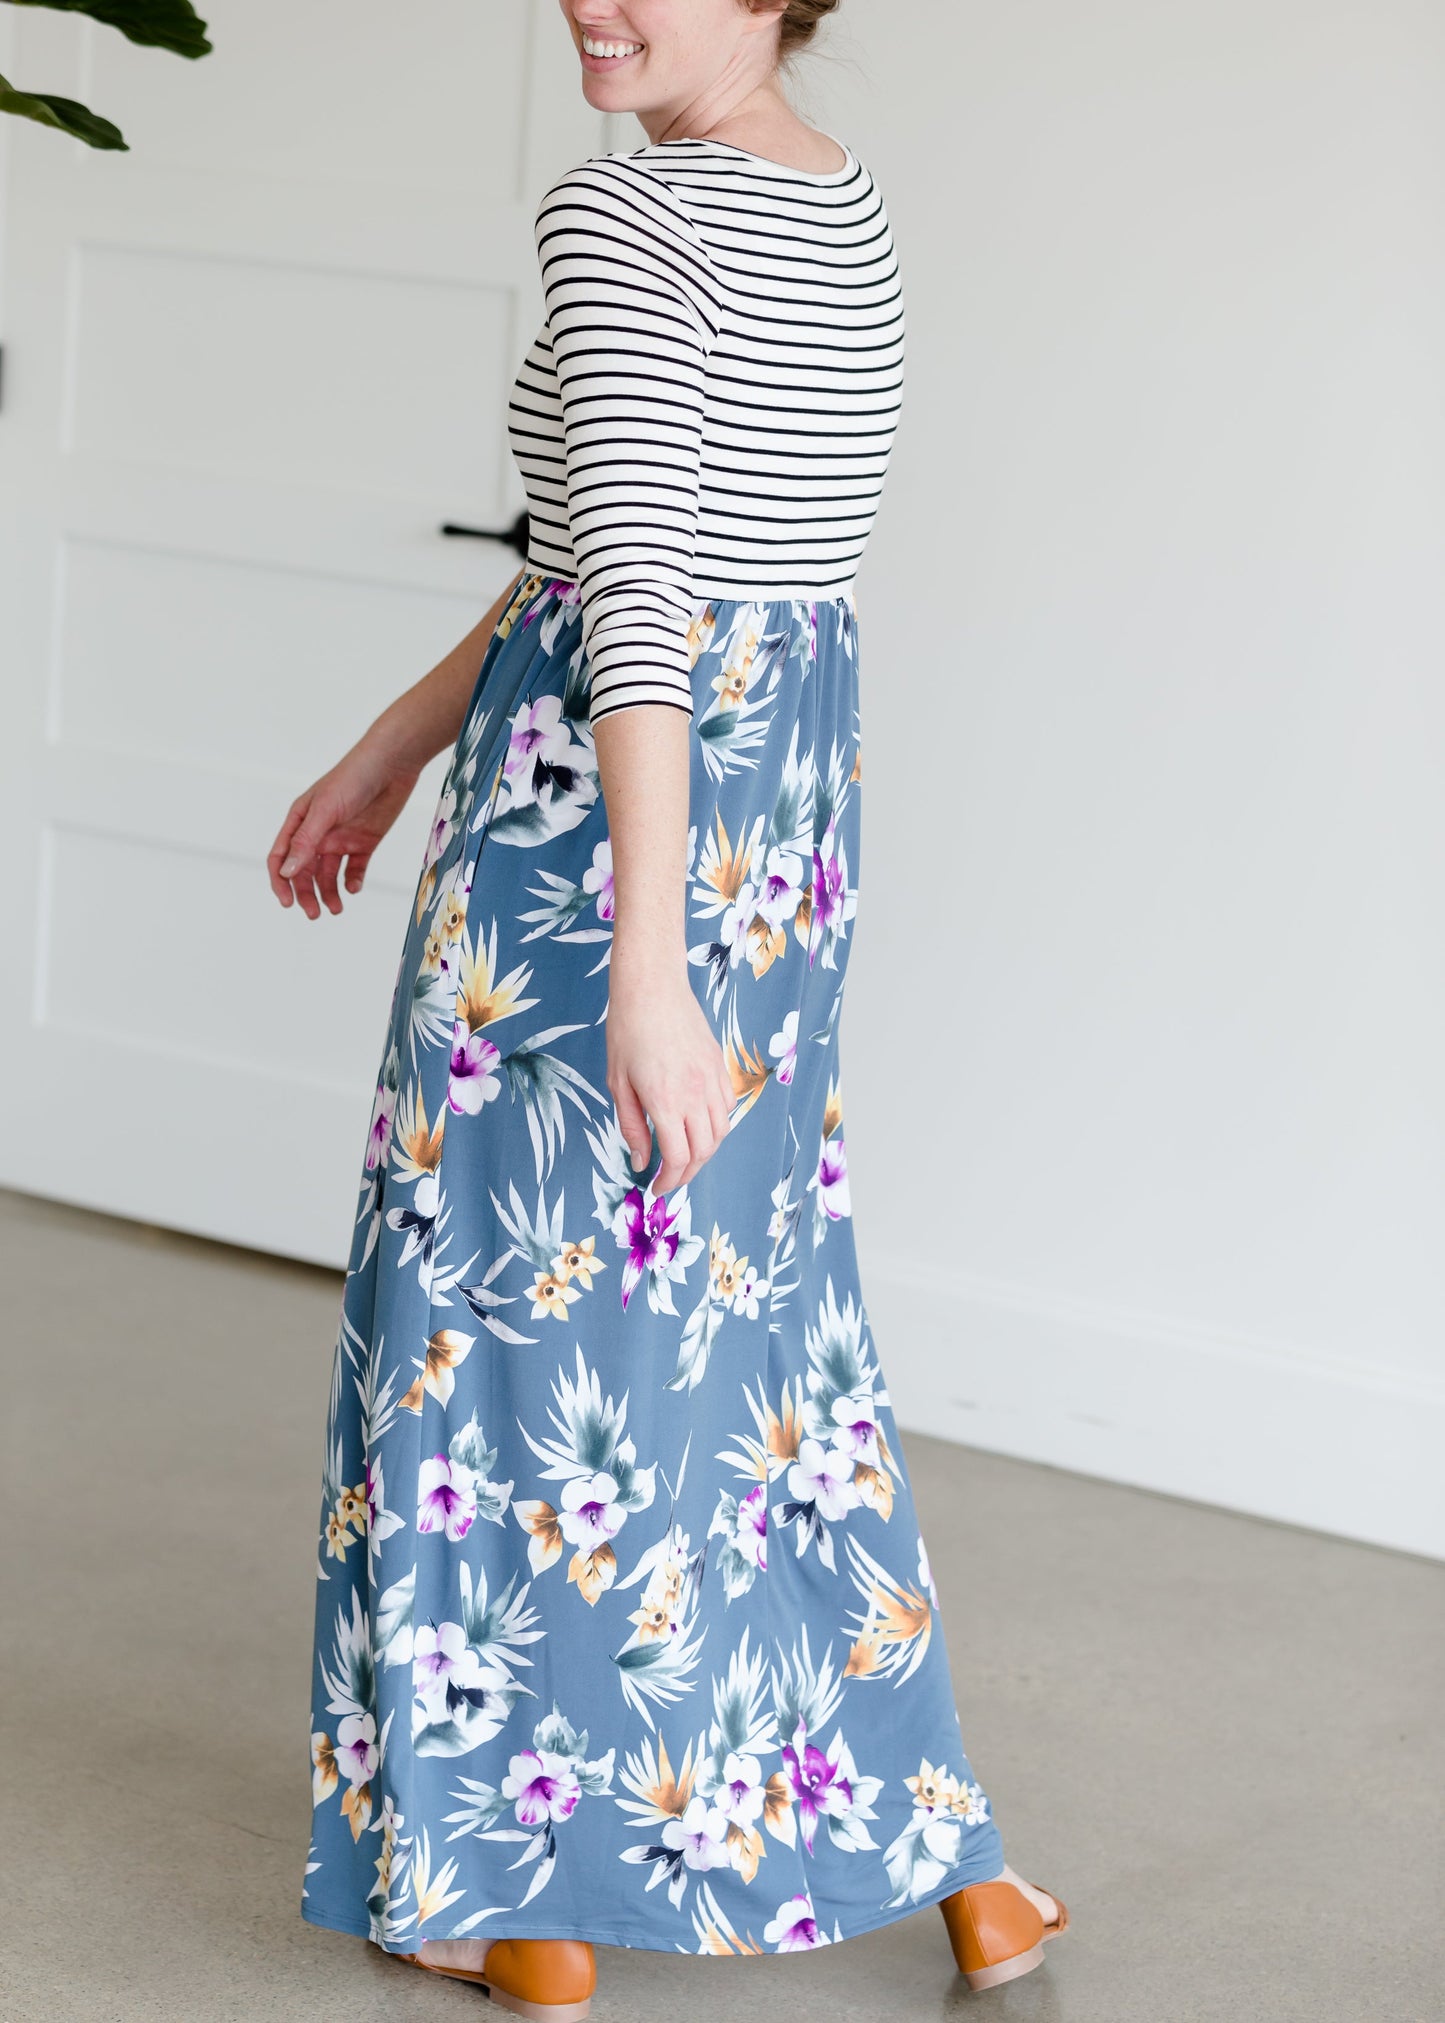 Floral and Striped Knit Maxi Dress - FINAL SALE Dresses